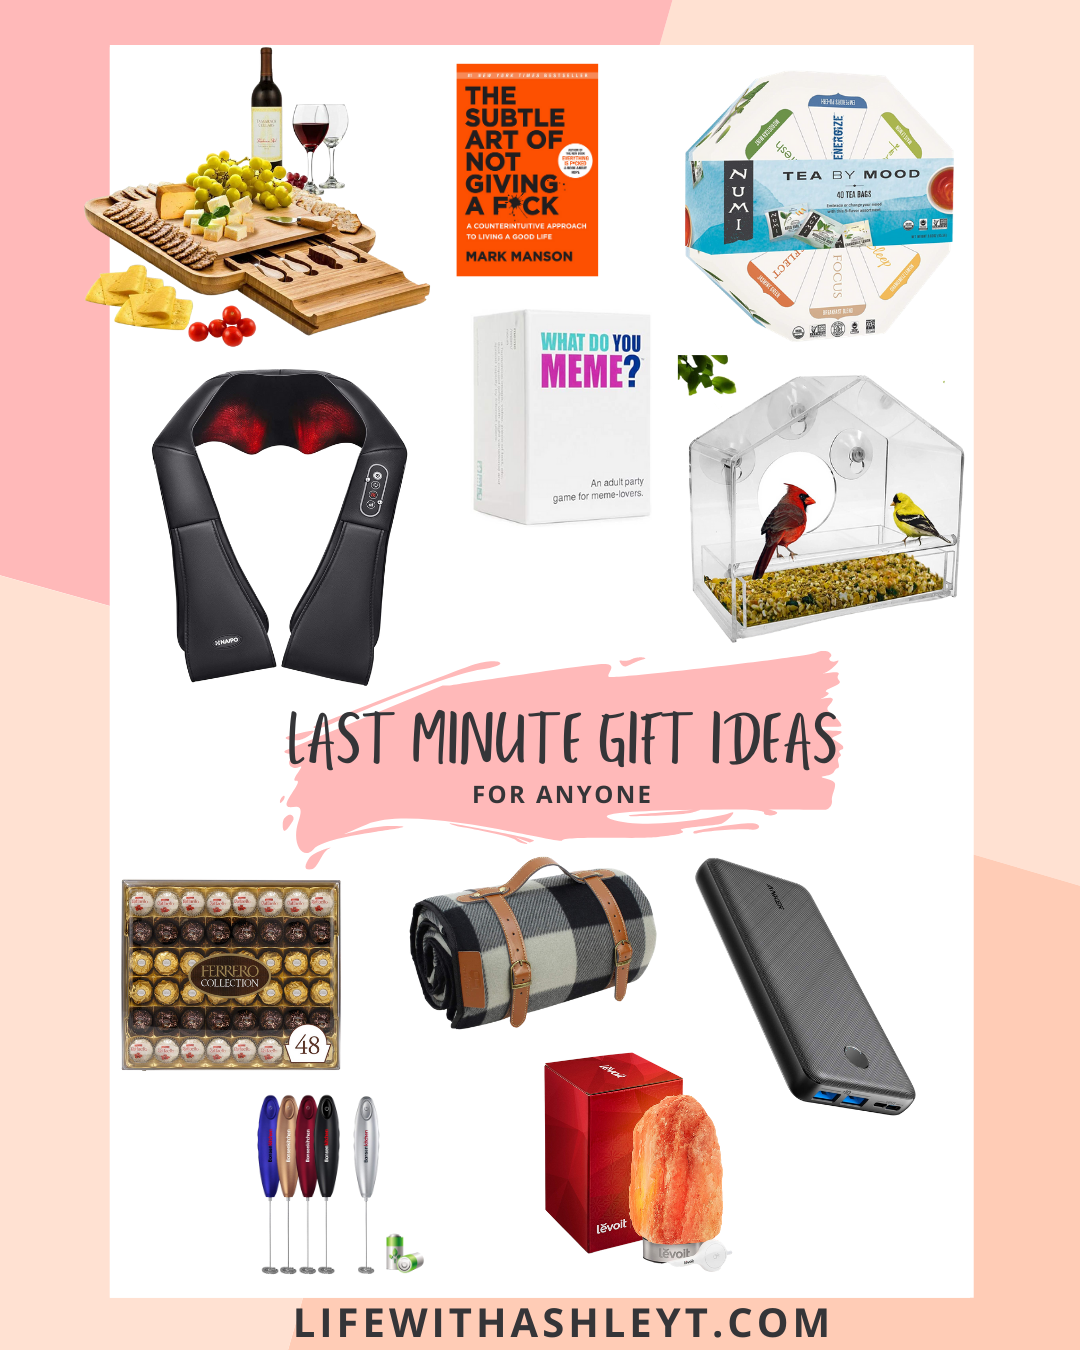 15 Great Last Minute Gift Ideas for Him